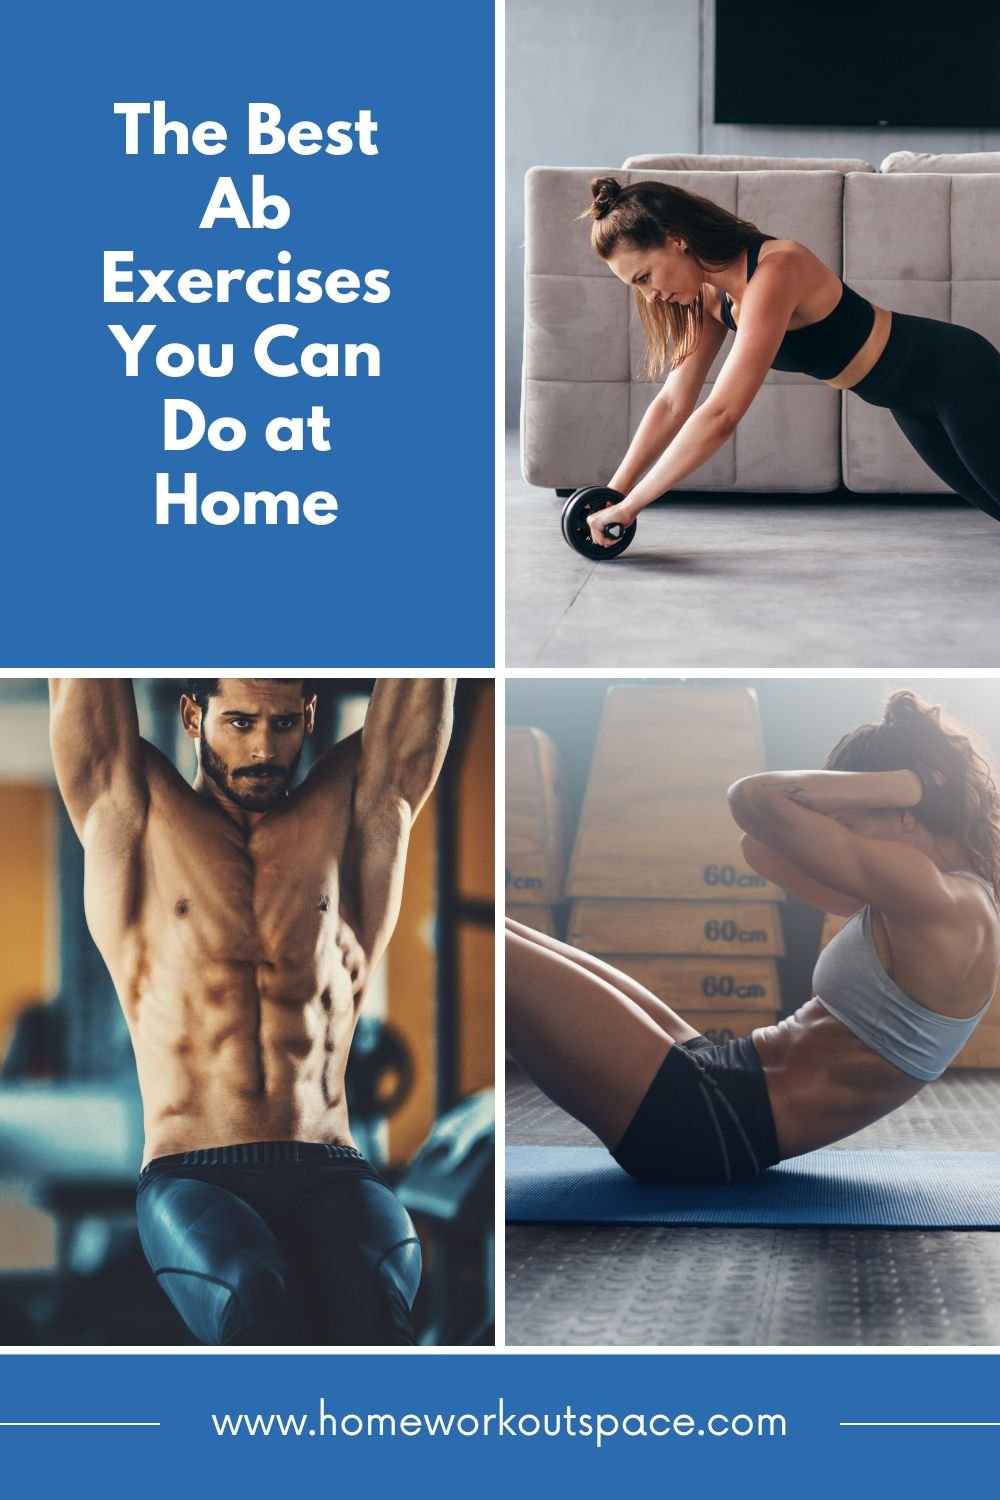 Best Ab Exercises You Can Do at Home